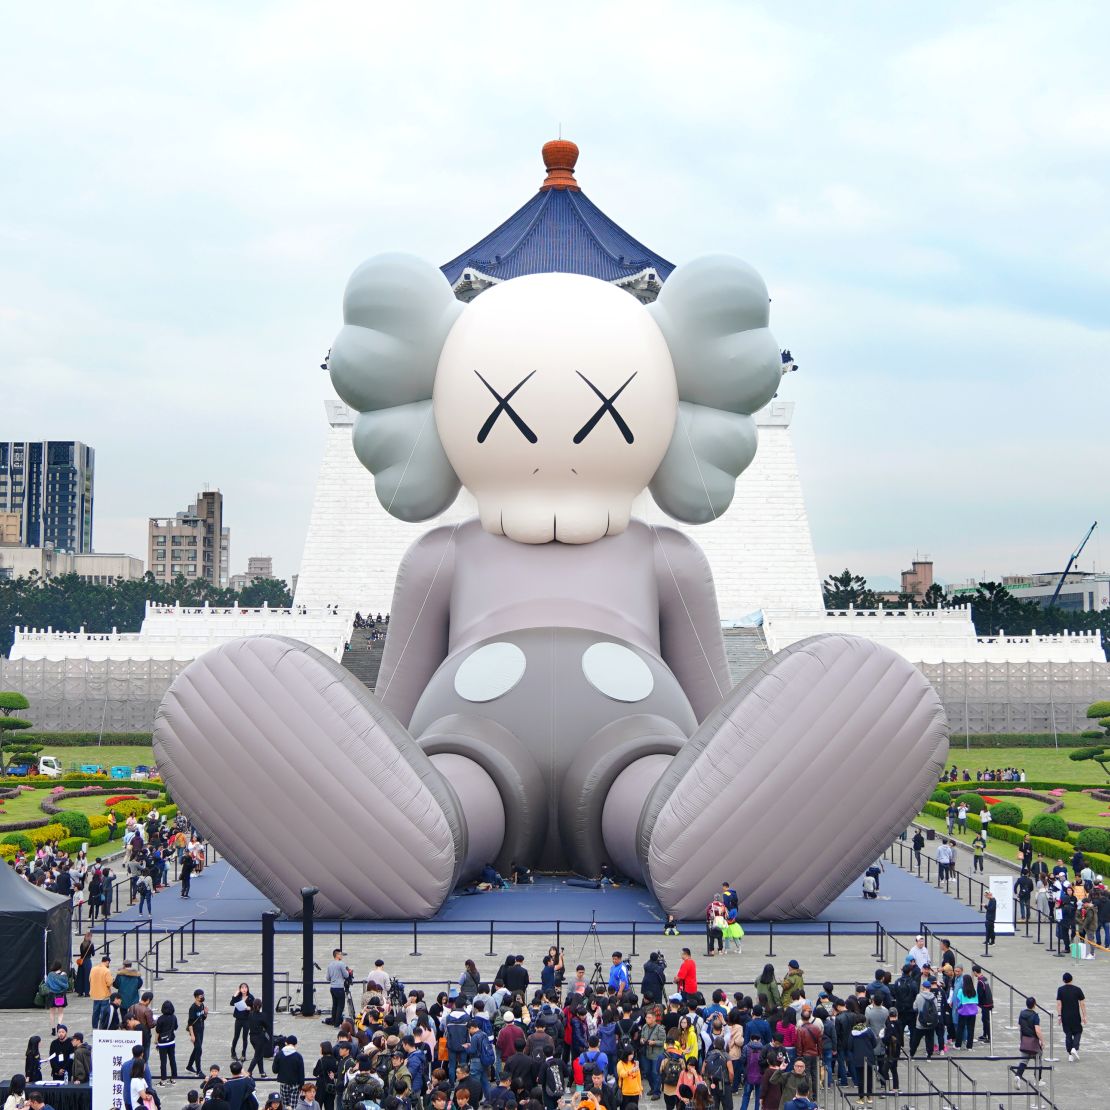 Slightly smaller versions of the project, named "KAWS: Holiday," have appeared in front of Taipei's Chiang Kai-shek Memorial Hall and in Seoul's Seokchon Lake. 